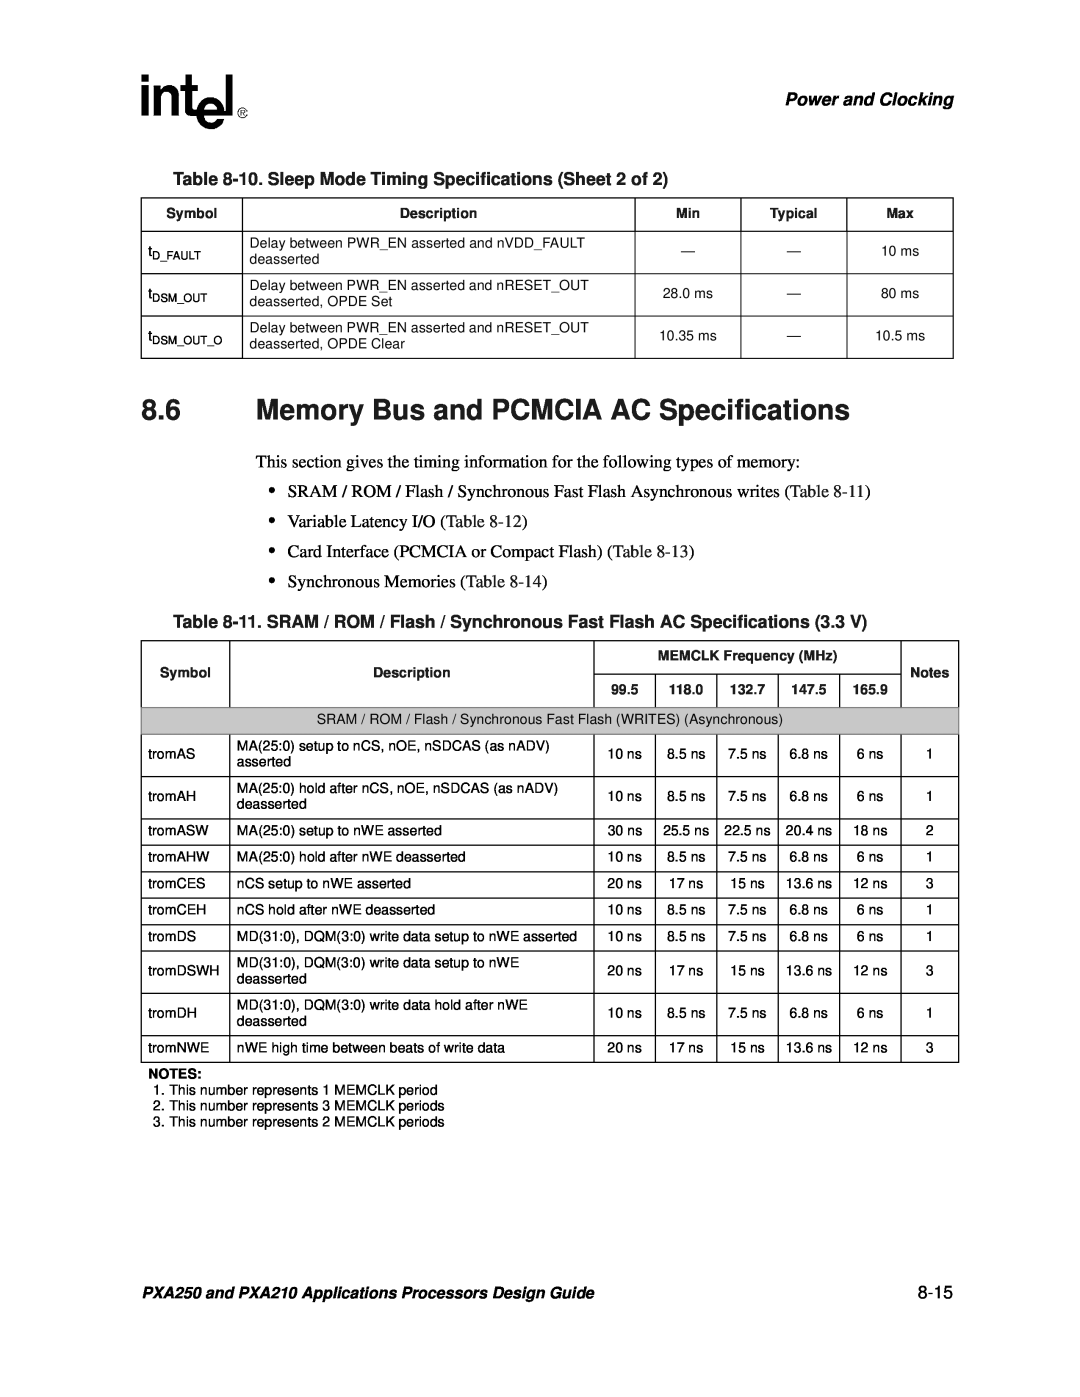 Intel PXA250 and PXA210 manual Memory Bus and PCMCIA AC Specifications, Power and Clocking, 8-15 